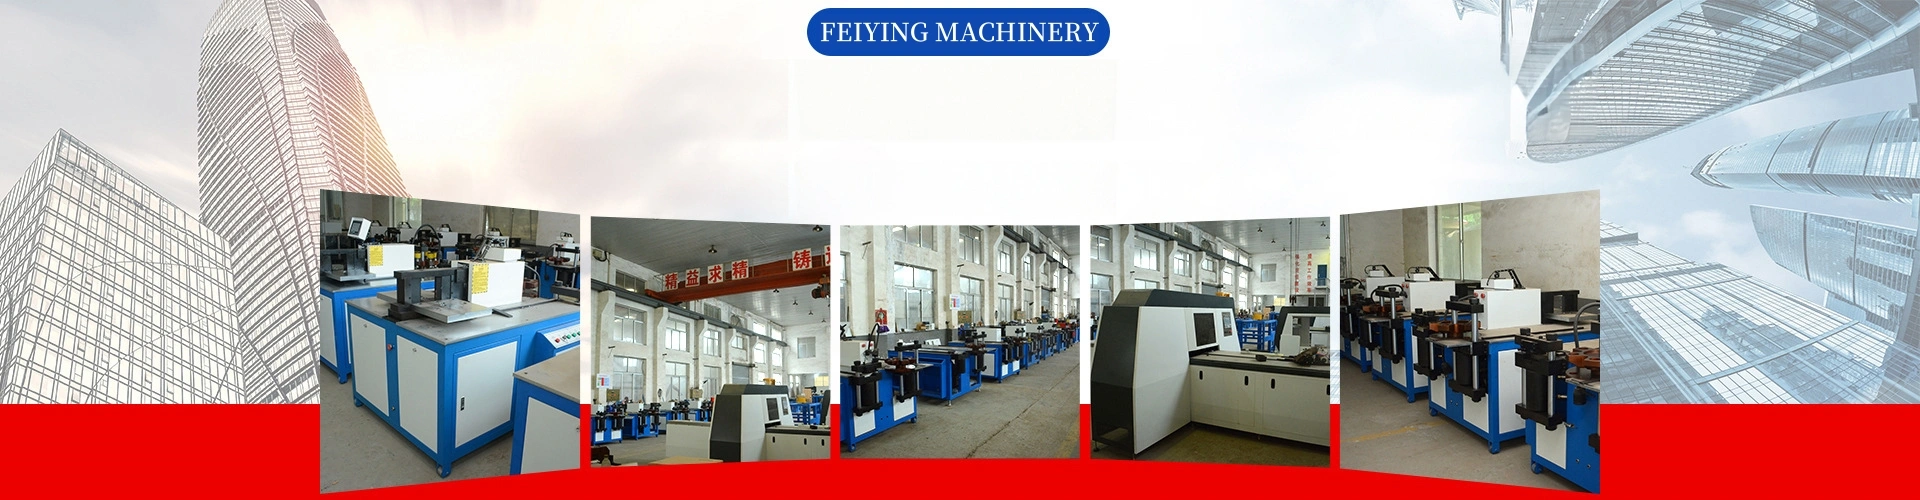 5000 ㎡ of powerful factory, intergraint design, production and sale 20 years of Busbar machine manufacturing experience